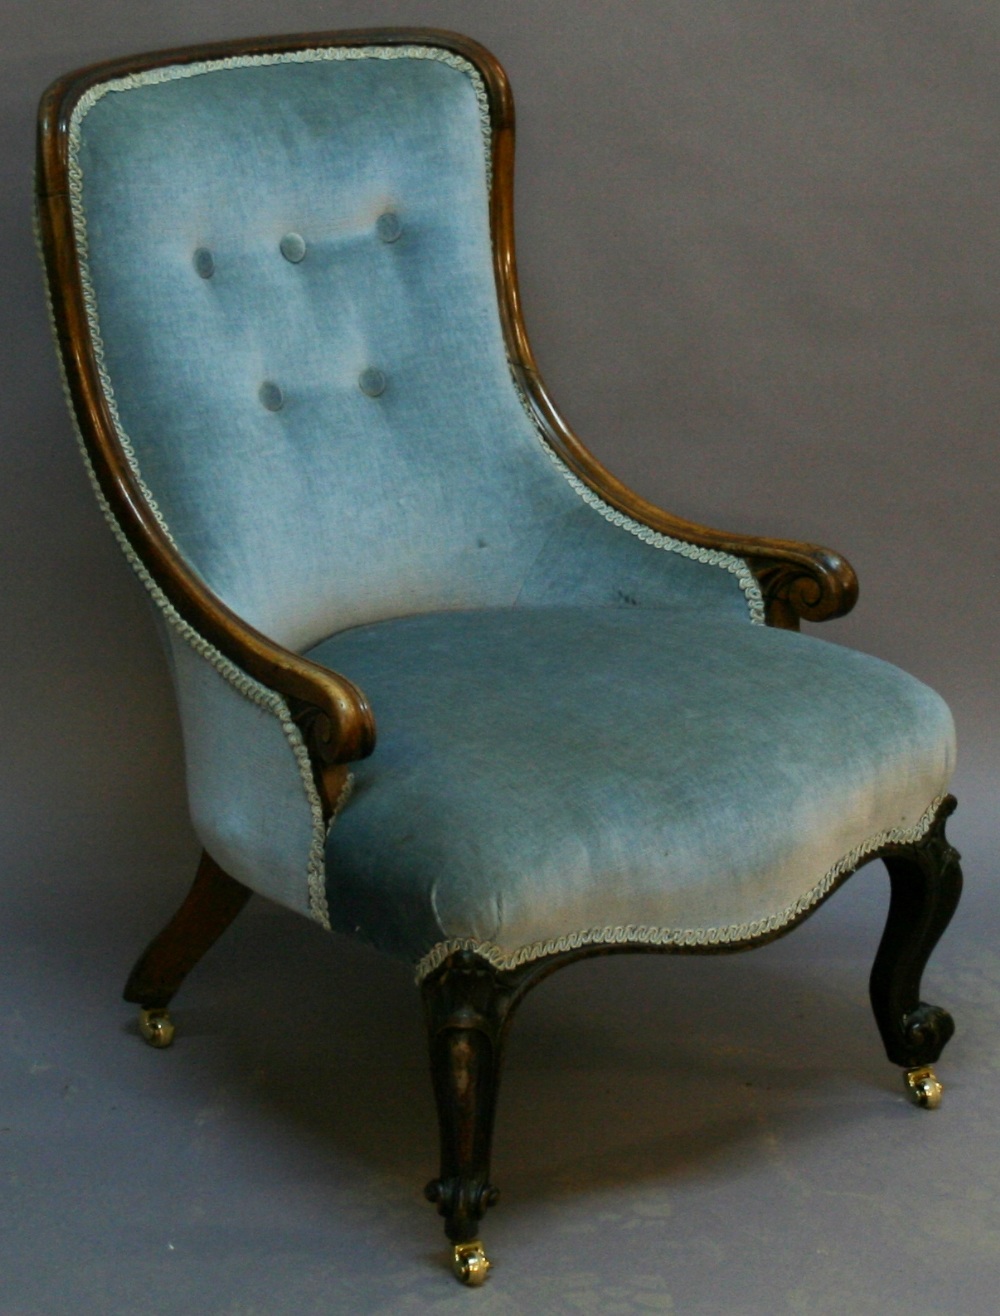 A VICTORIAN WALNUT FRAMED NURSING CHAIR having a padded buttoned back, low scrolled arms and